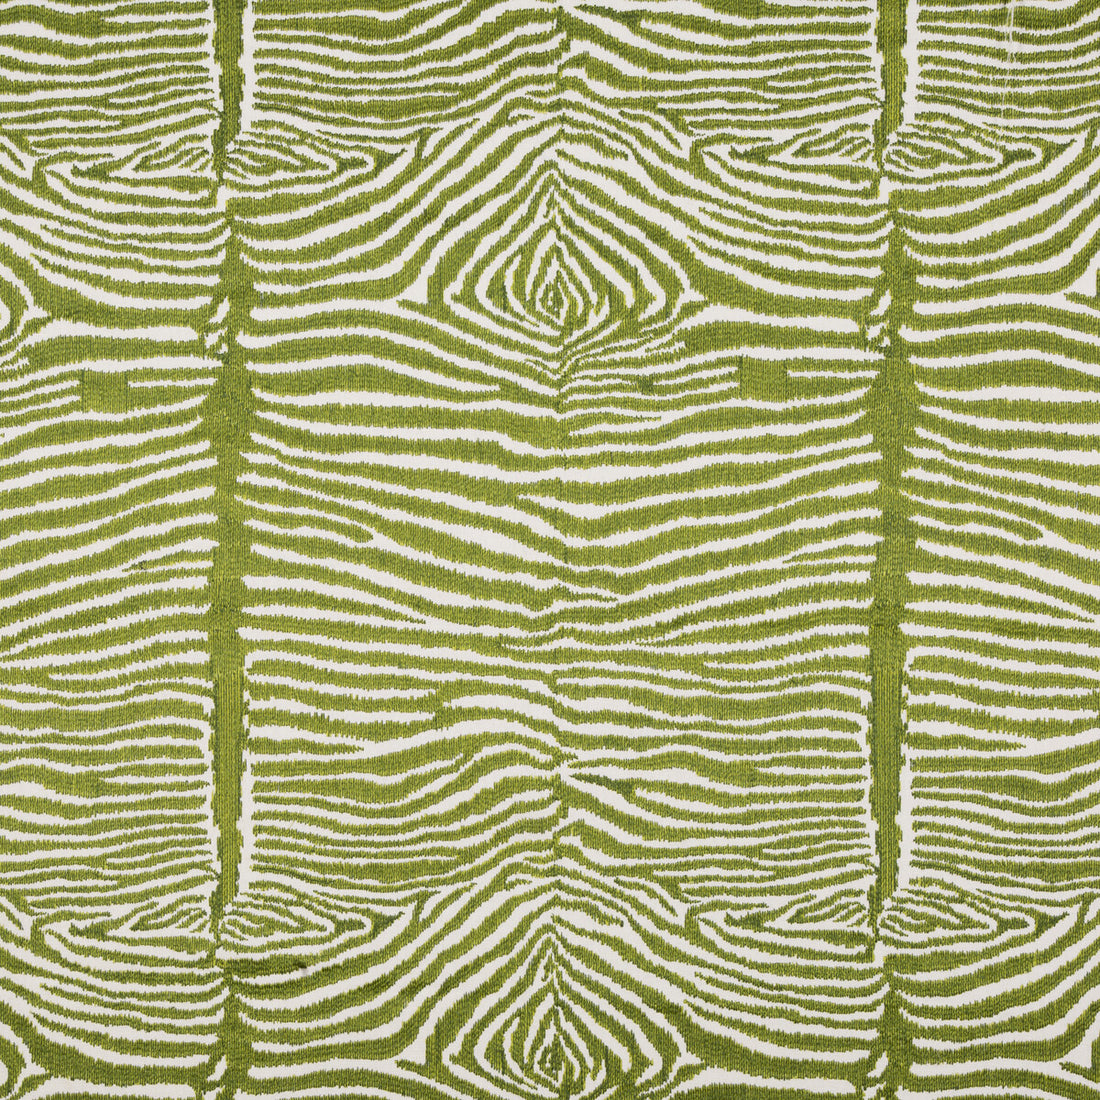 Le Zebre Emb fabric in leaf color - pattern 8015172.3.0 - by Brunschwig &amp; Fils in the Cape Comorin collection